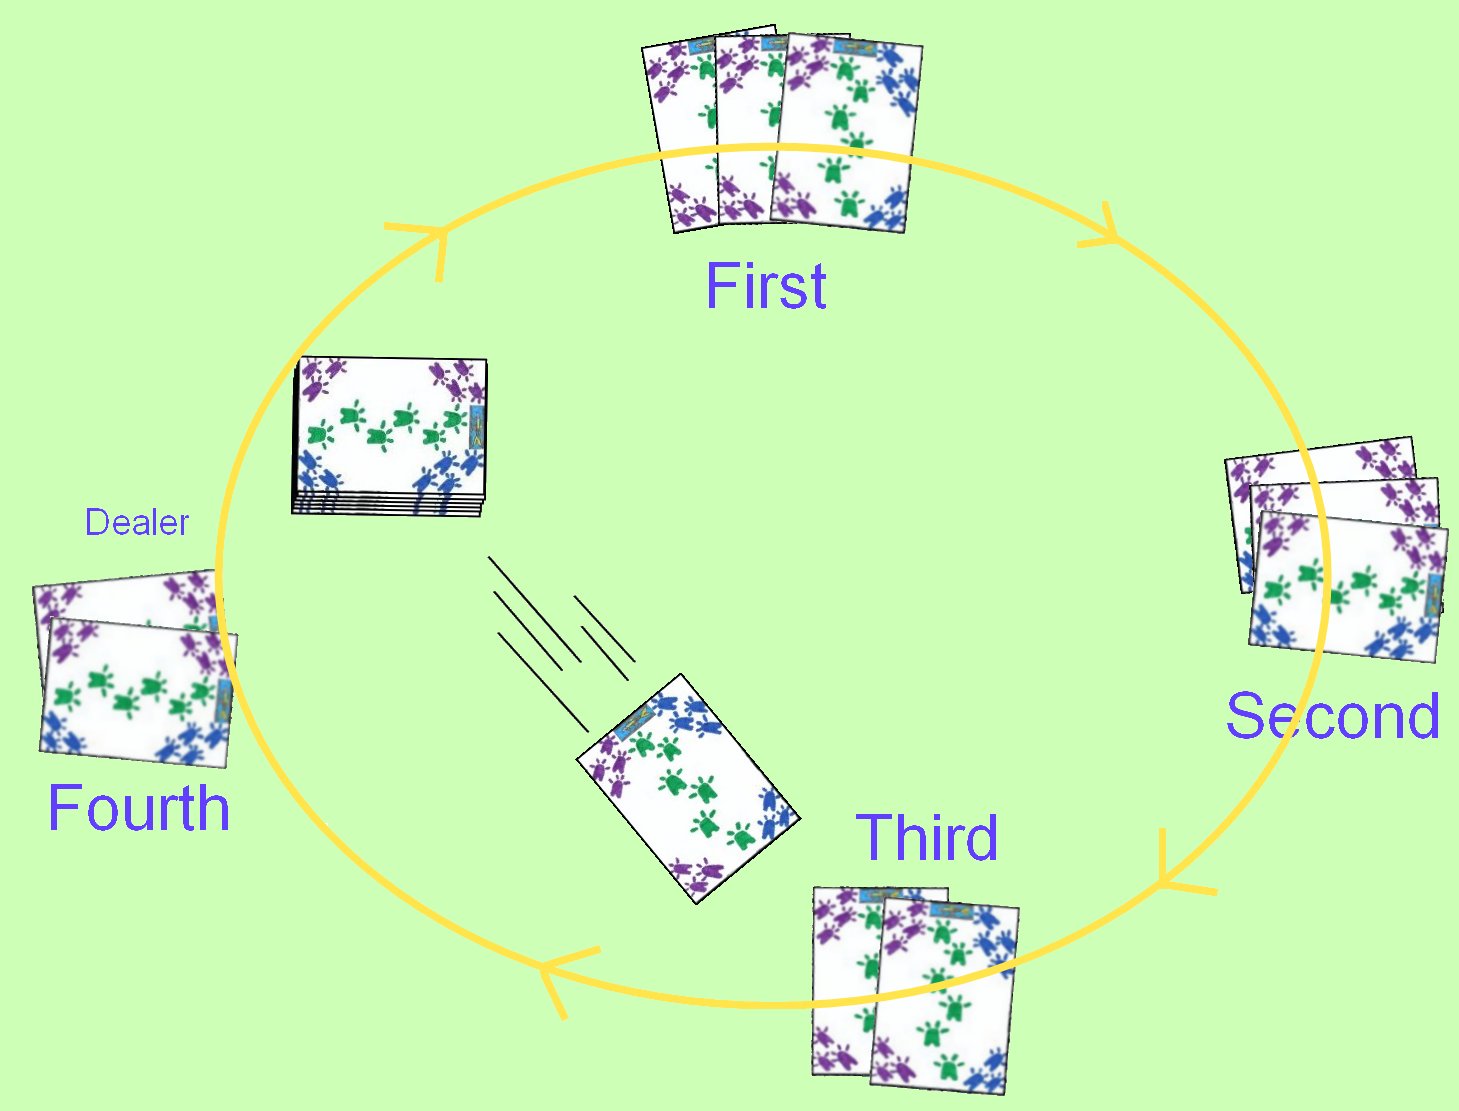 The basic deal using a clockwise rotation